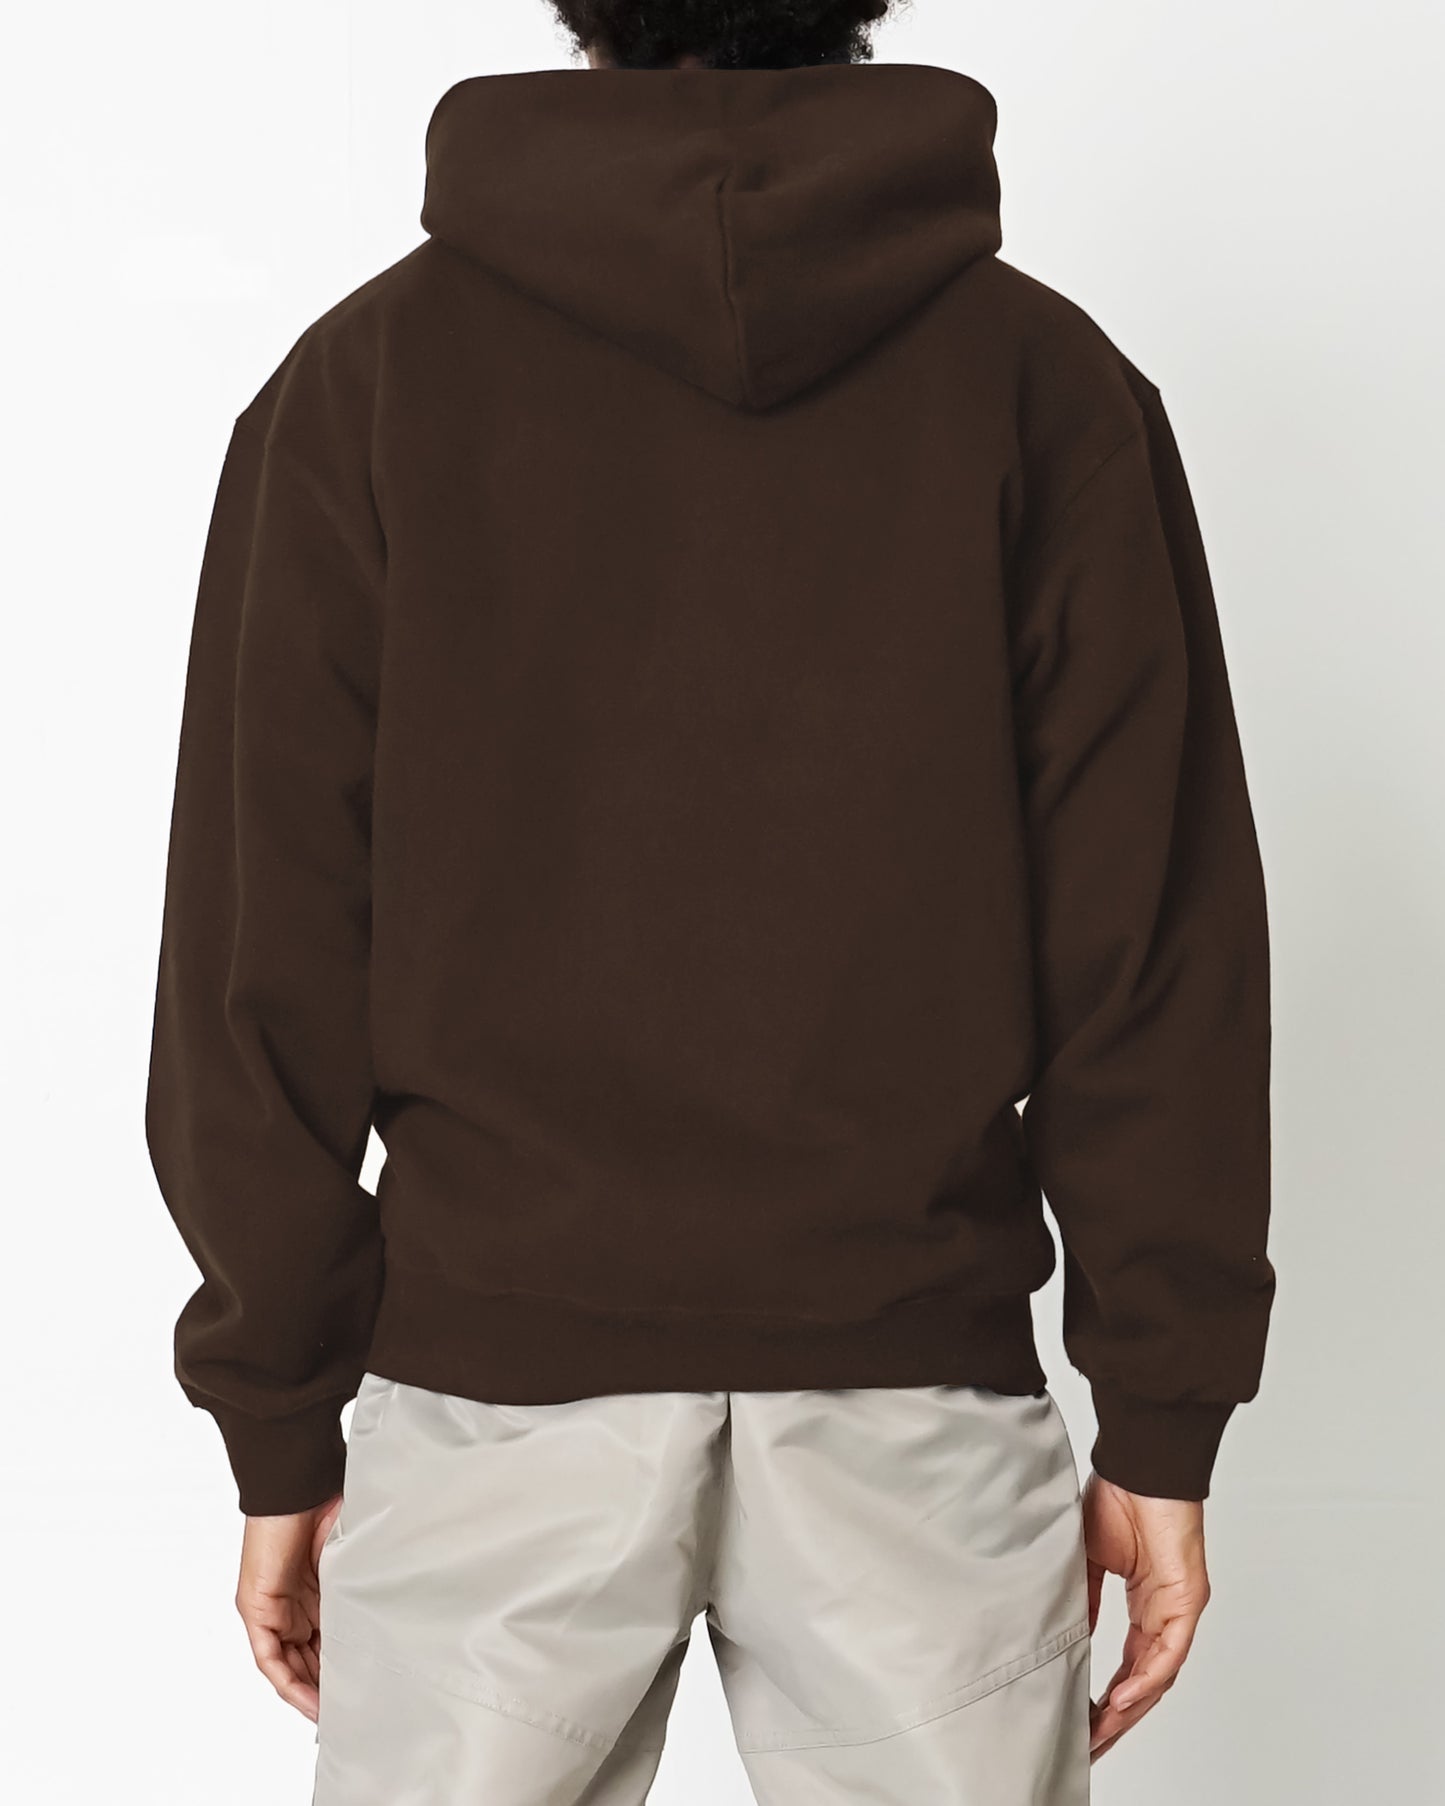 EPTM PERFECT BOXY HOODIE-BROWN